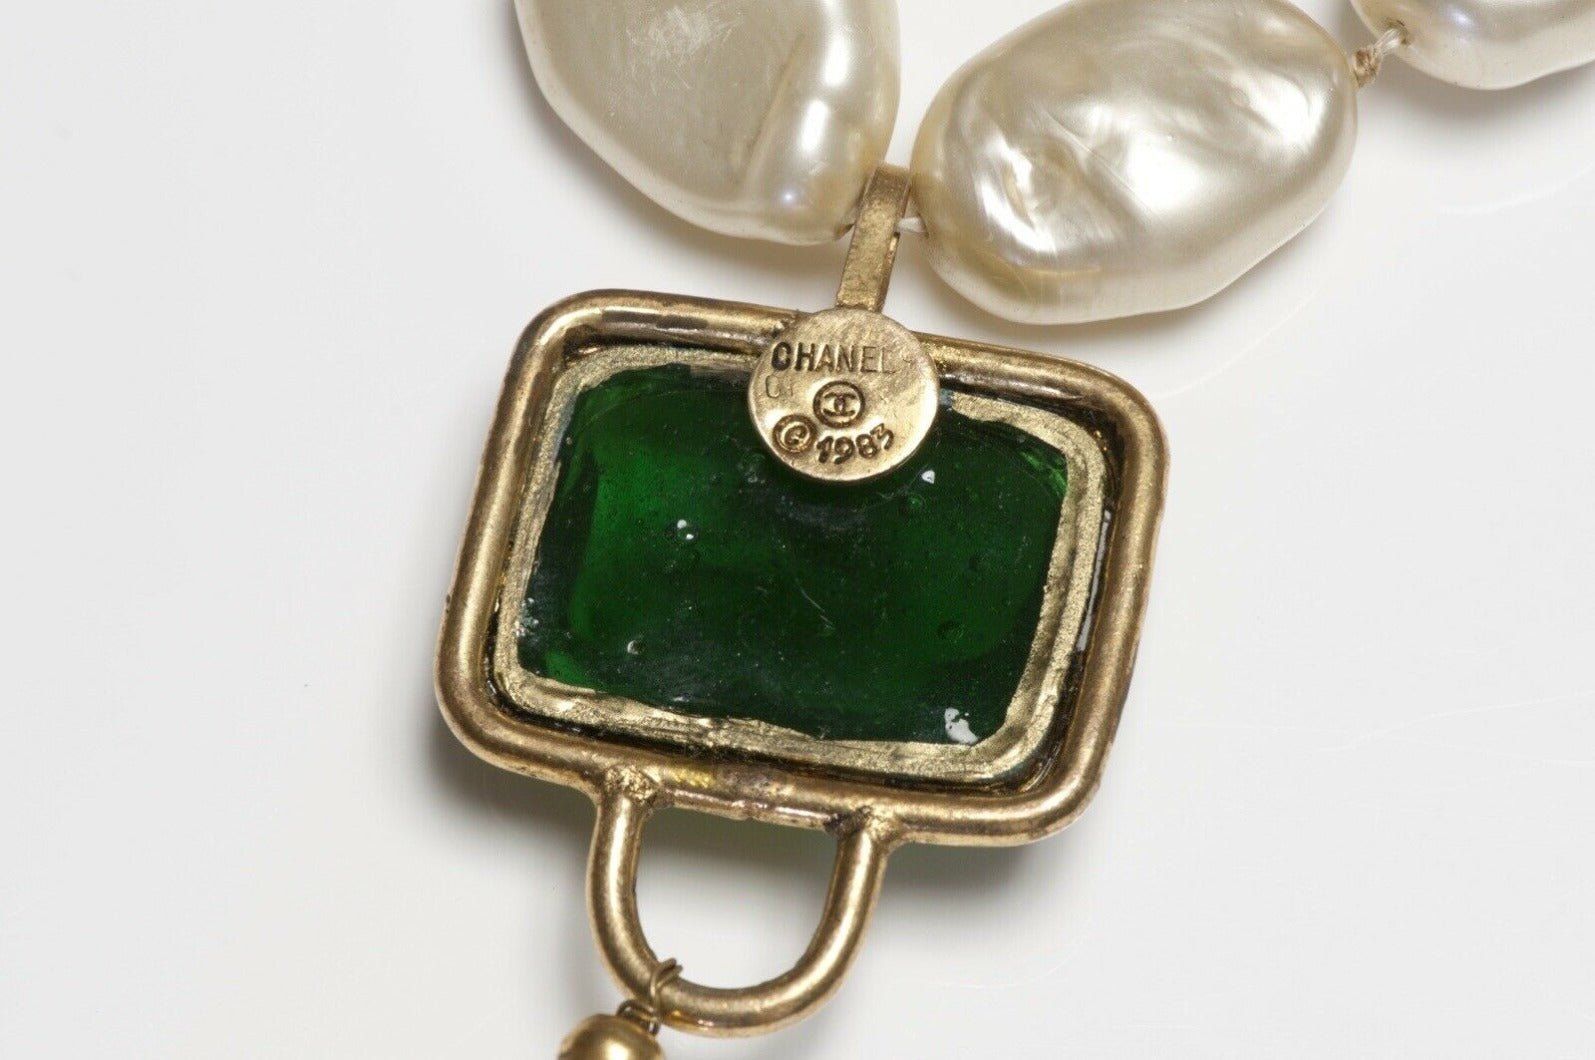 CHANEL Paris 1983 Couture Maison Gripoix Pearl Green Poured Glass Necklace - DSF Antique Jewelry